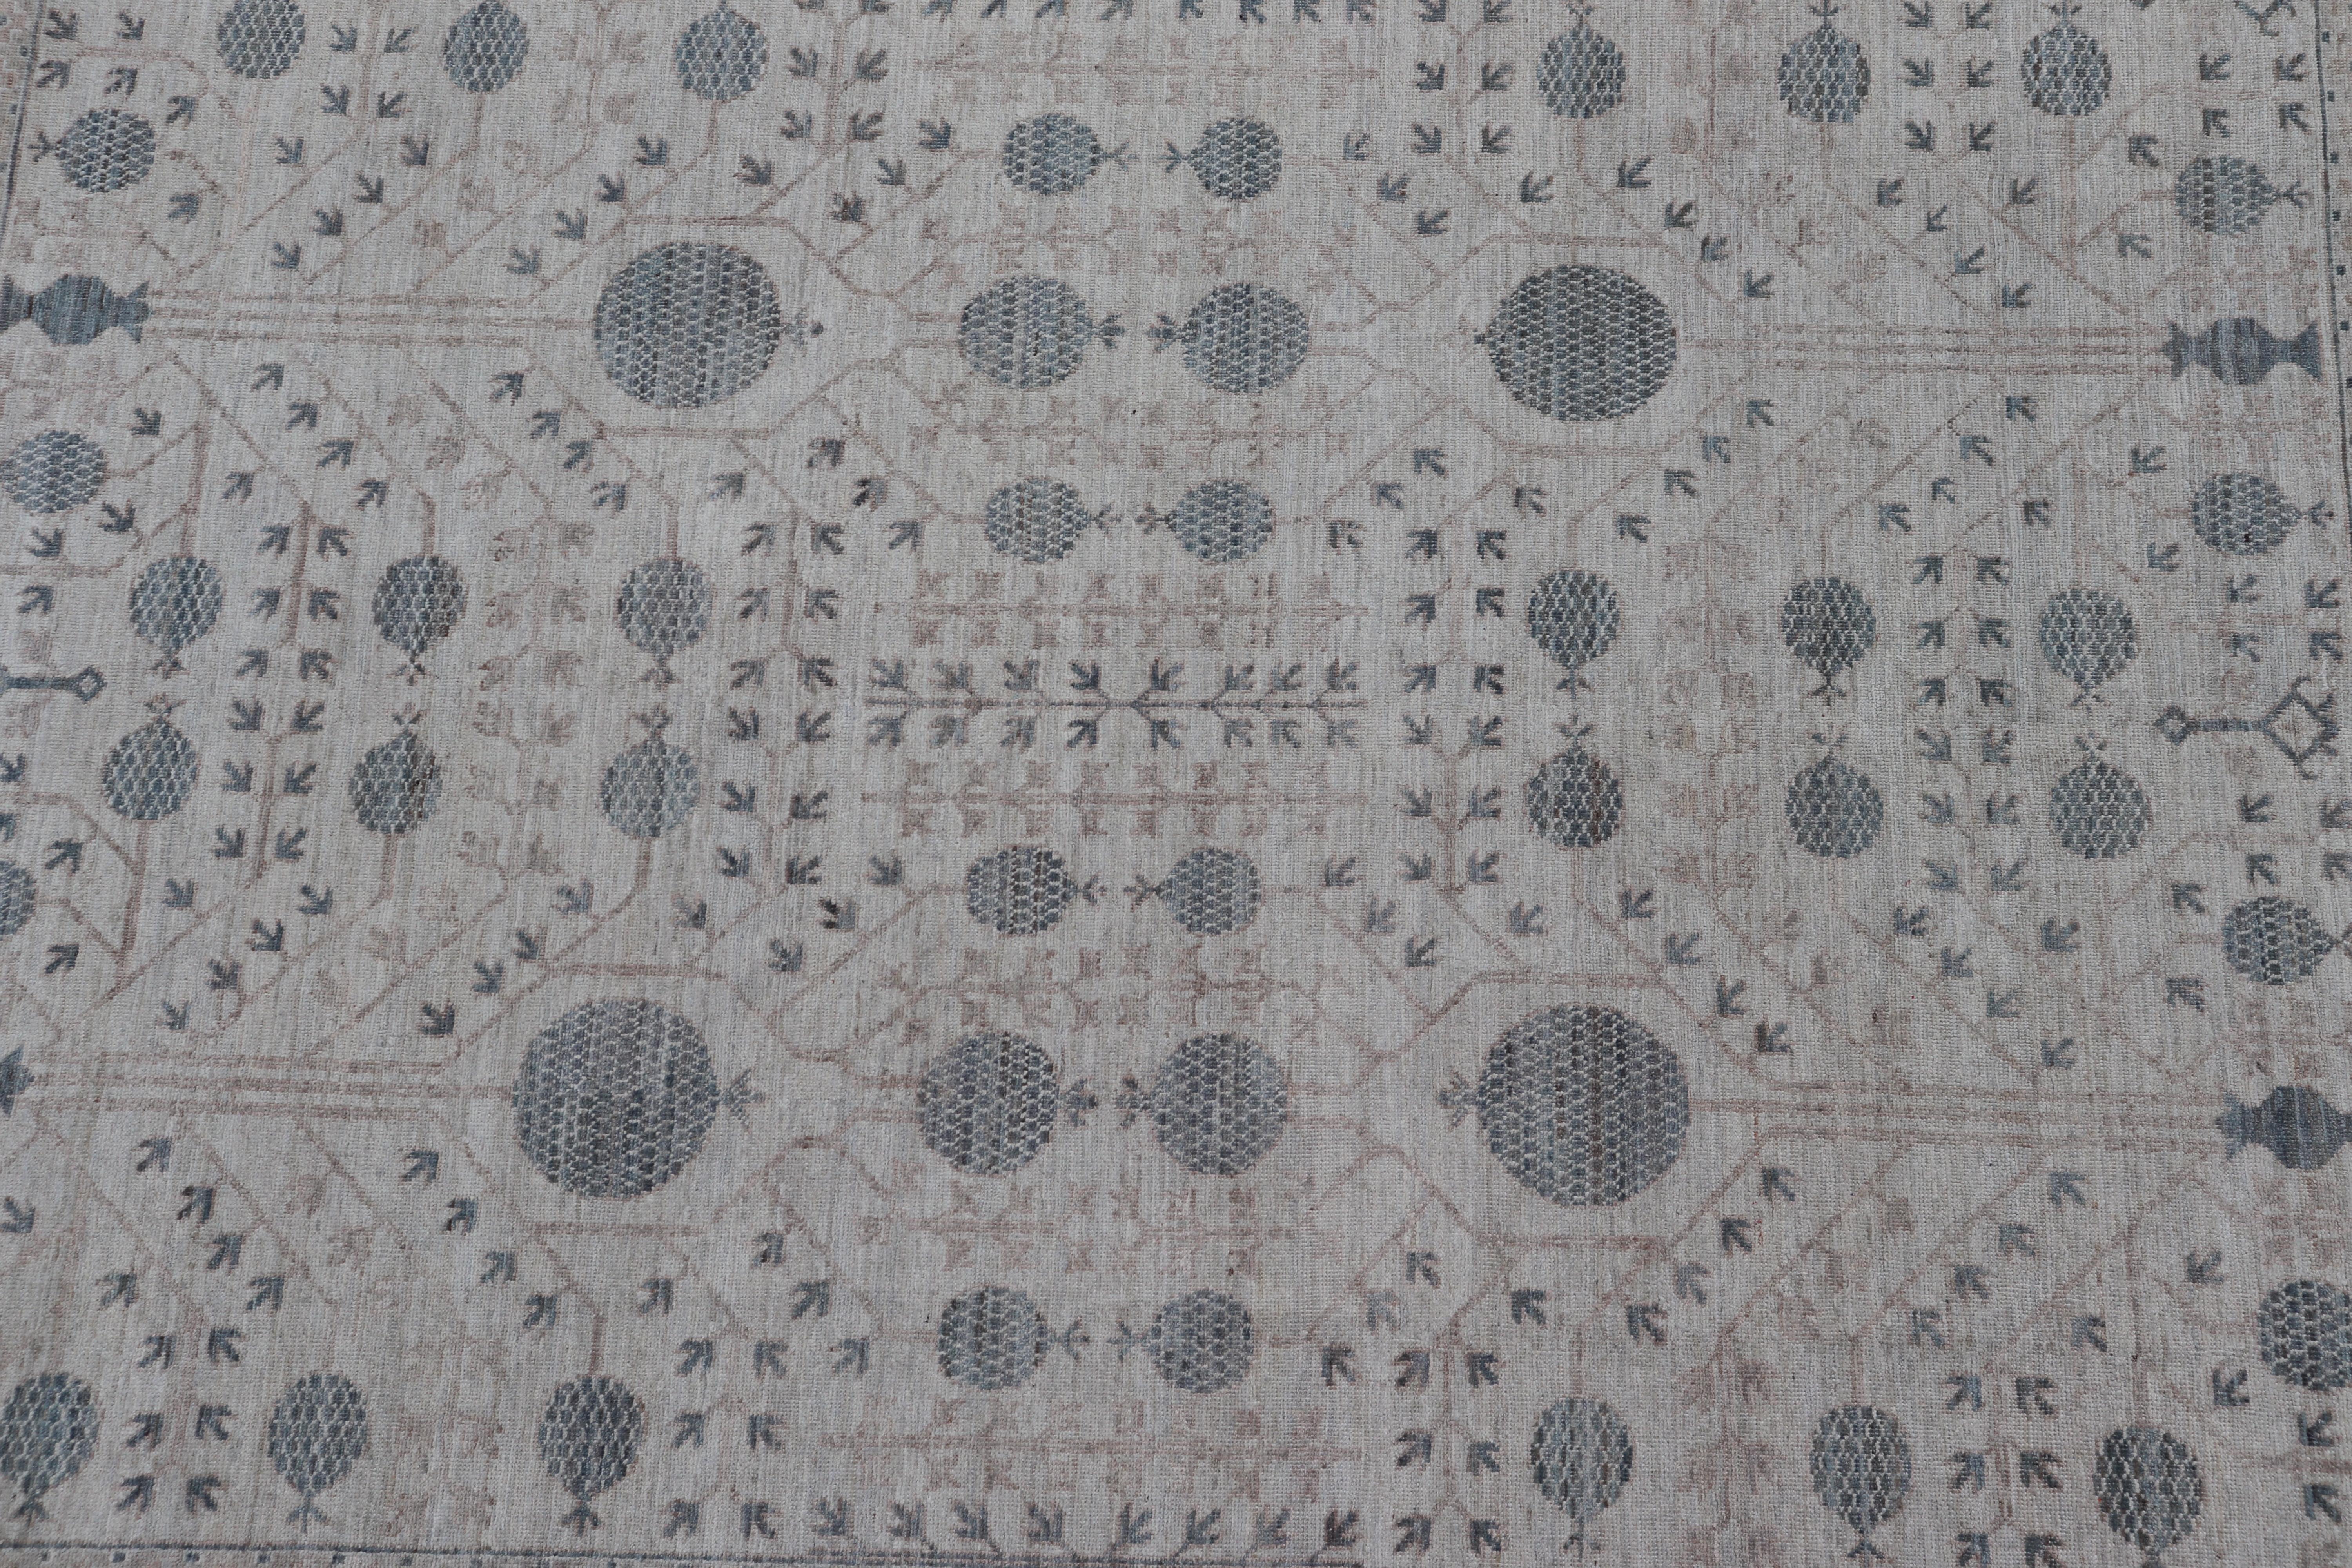 Modern Tribal Khotan Rug in Shades of Cream, Tan, and Light Teal For Sale 4